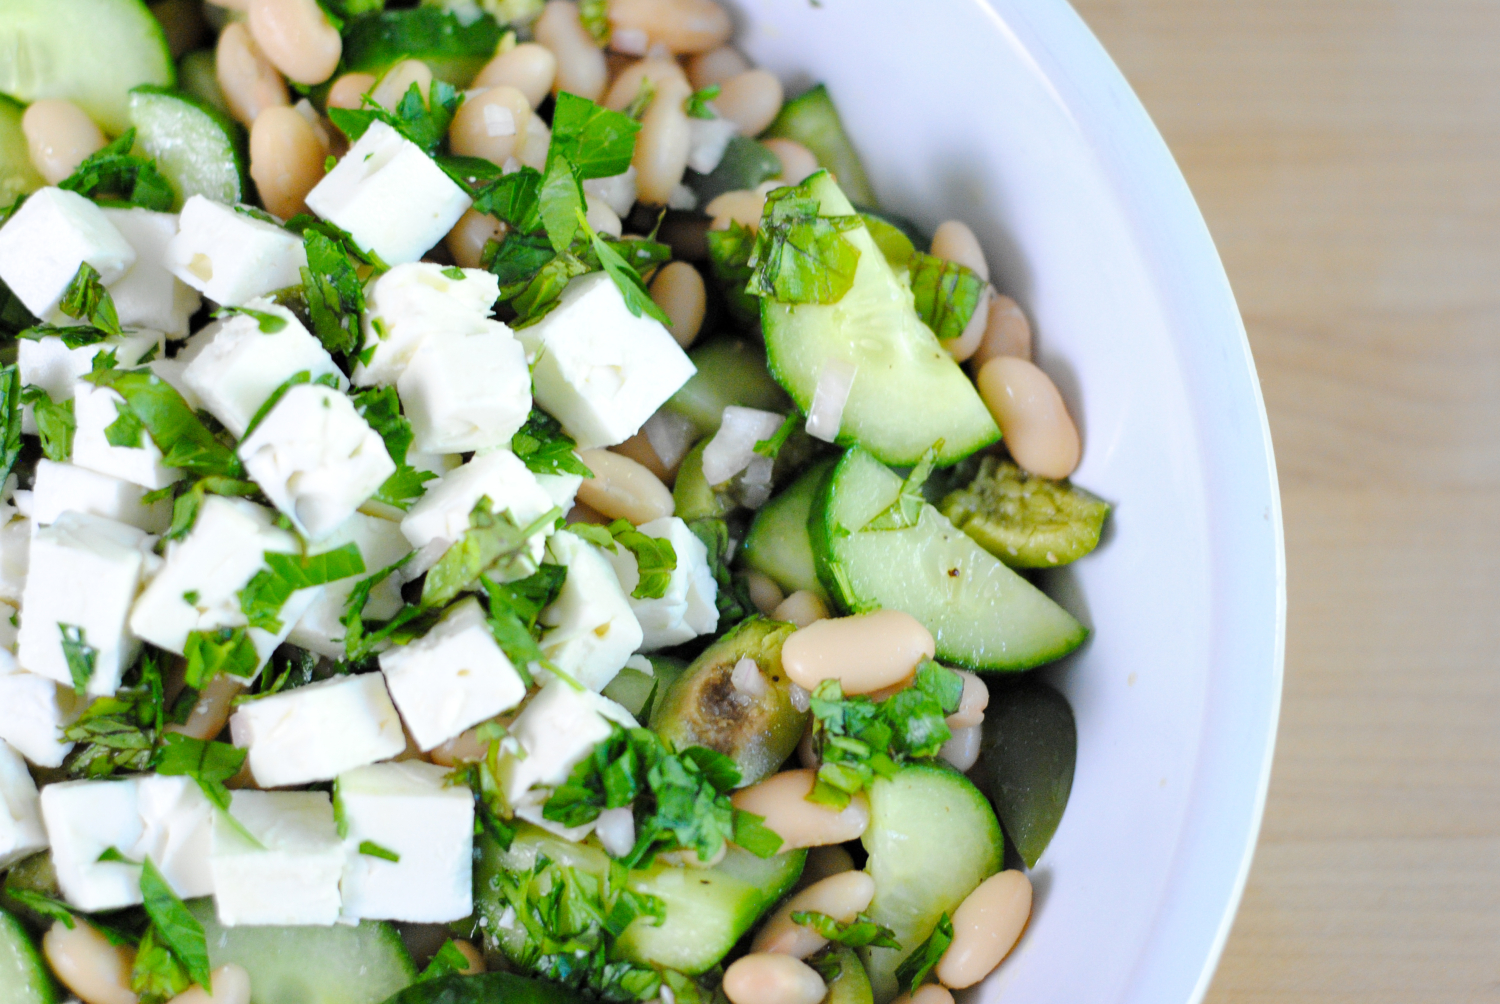 Perfect easy summer cucumber and white bean salad - so simple and so super delicious! An excellent vegetarian meal or side salad with grilled fish and meats.